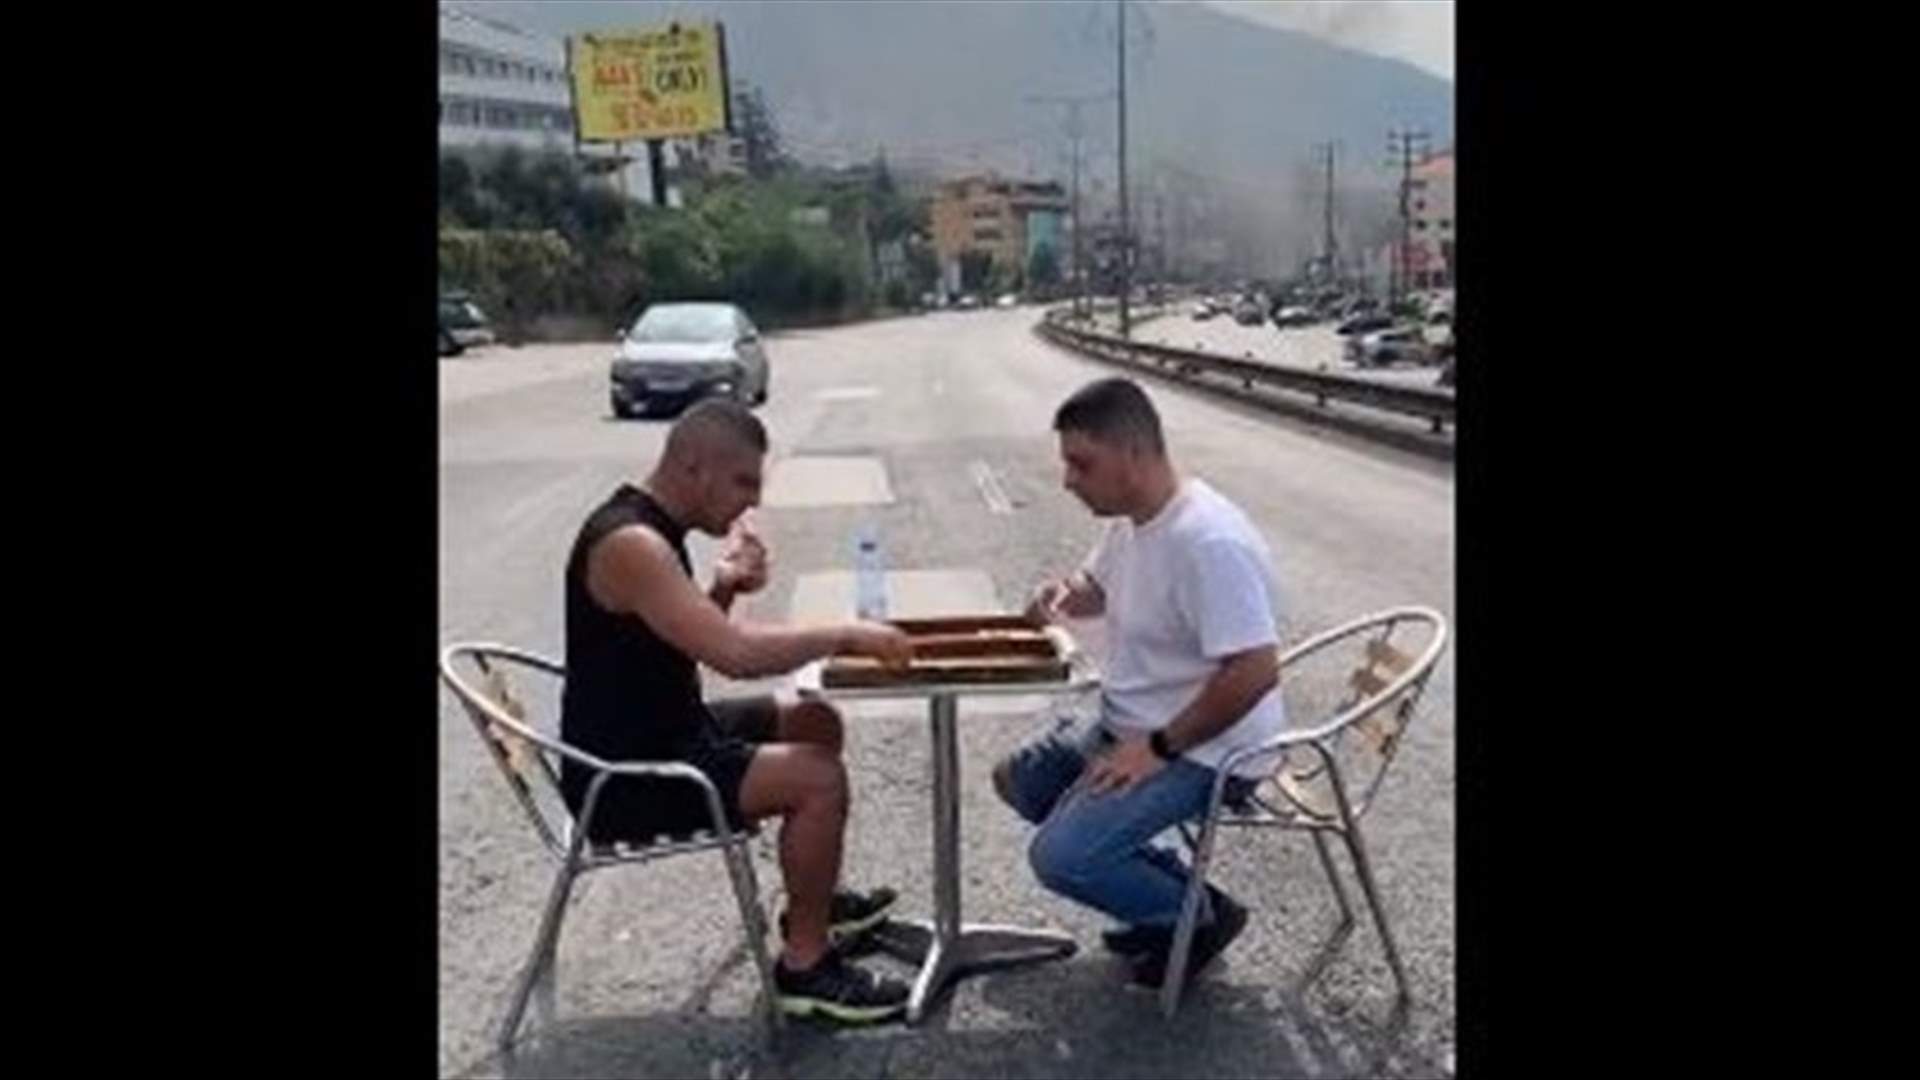 Citizens play board game in the middle of Ghazir highway